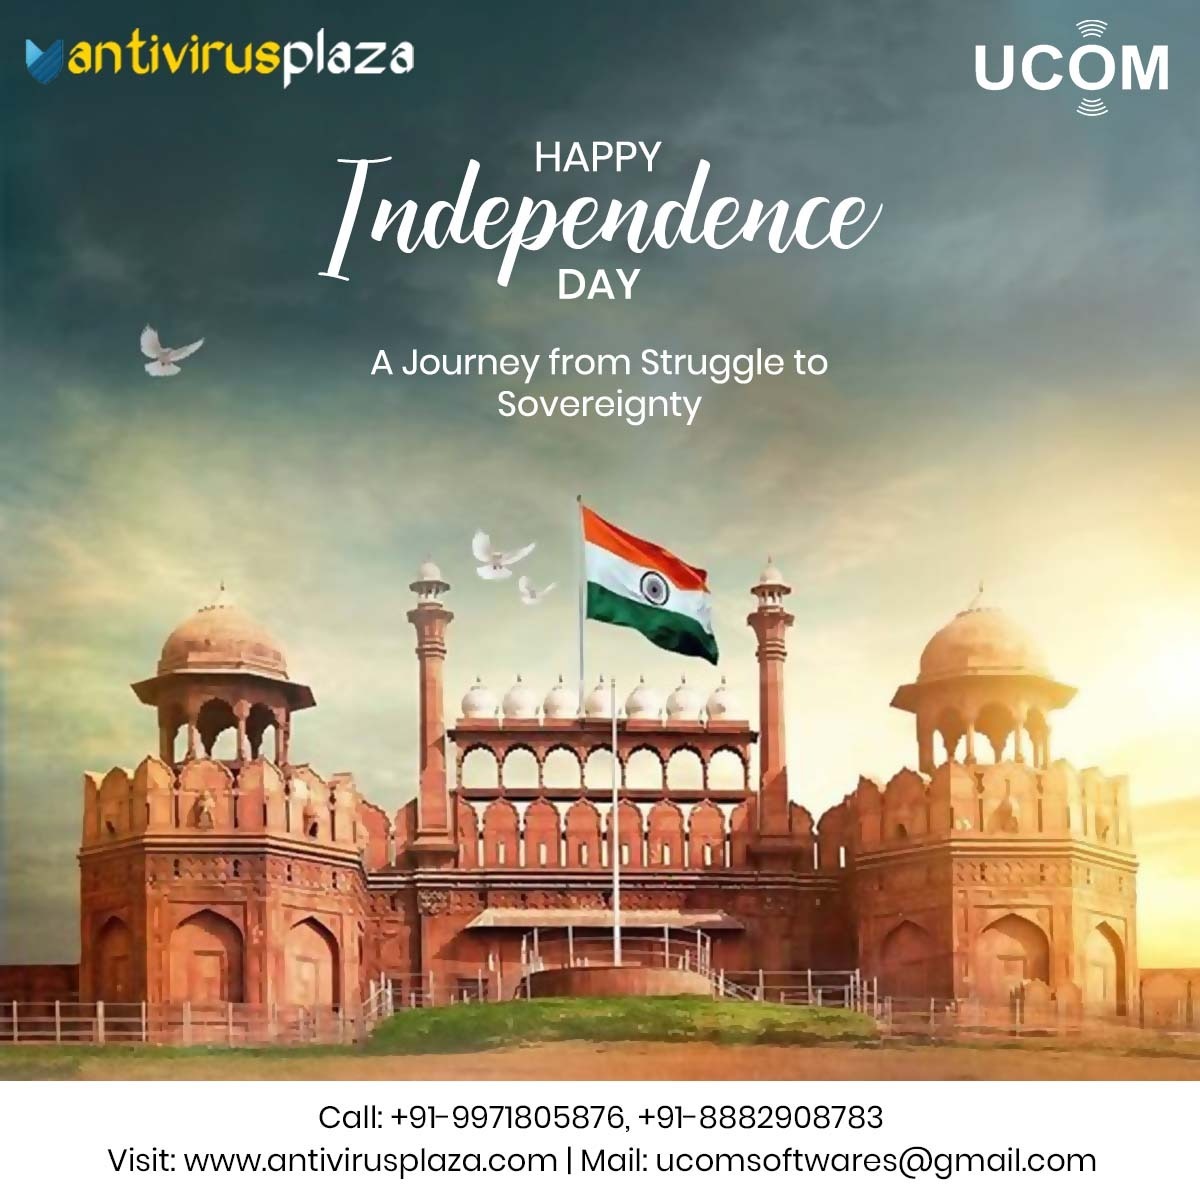 On this historic day, we honor the resilience and sacrifices that led us to freedom. 

#AntivirusPlaza #HappyIndependenceDay #IndependenceDay #FuturePatriots #ColorsOfFreedom #August15 #art #starsandstripes #flag #holiday #celebrate #Tricolor #Bharat #ProudIndian #Kiteflying